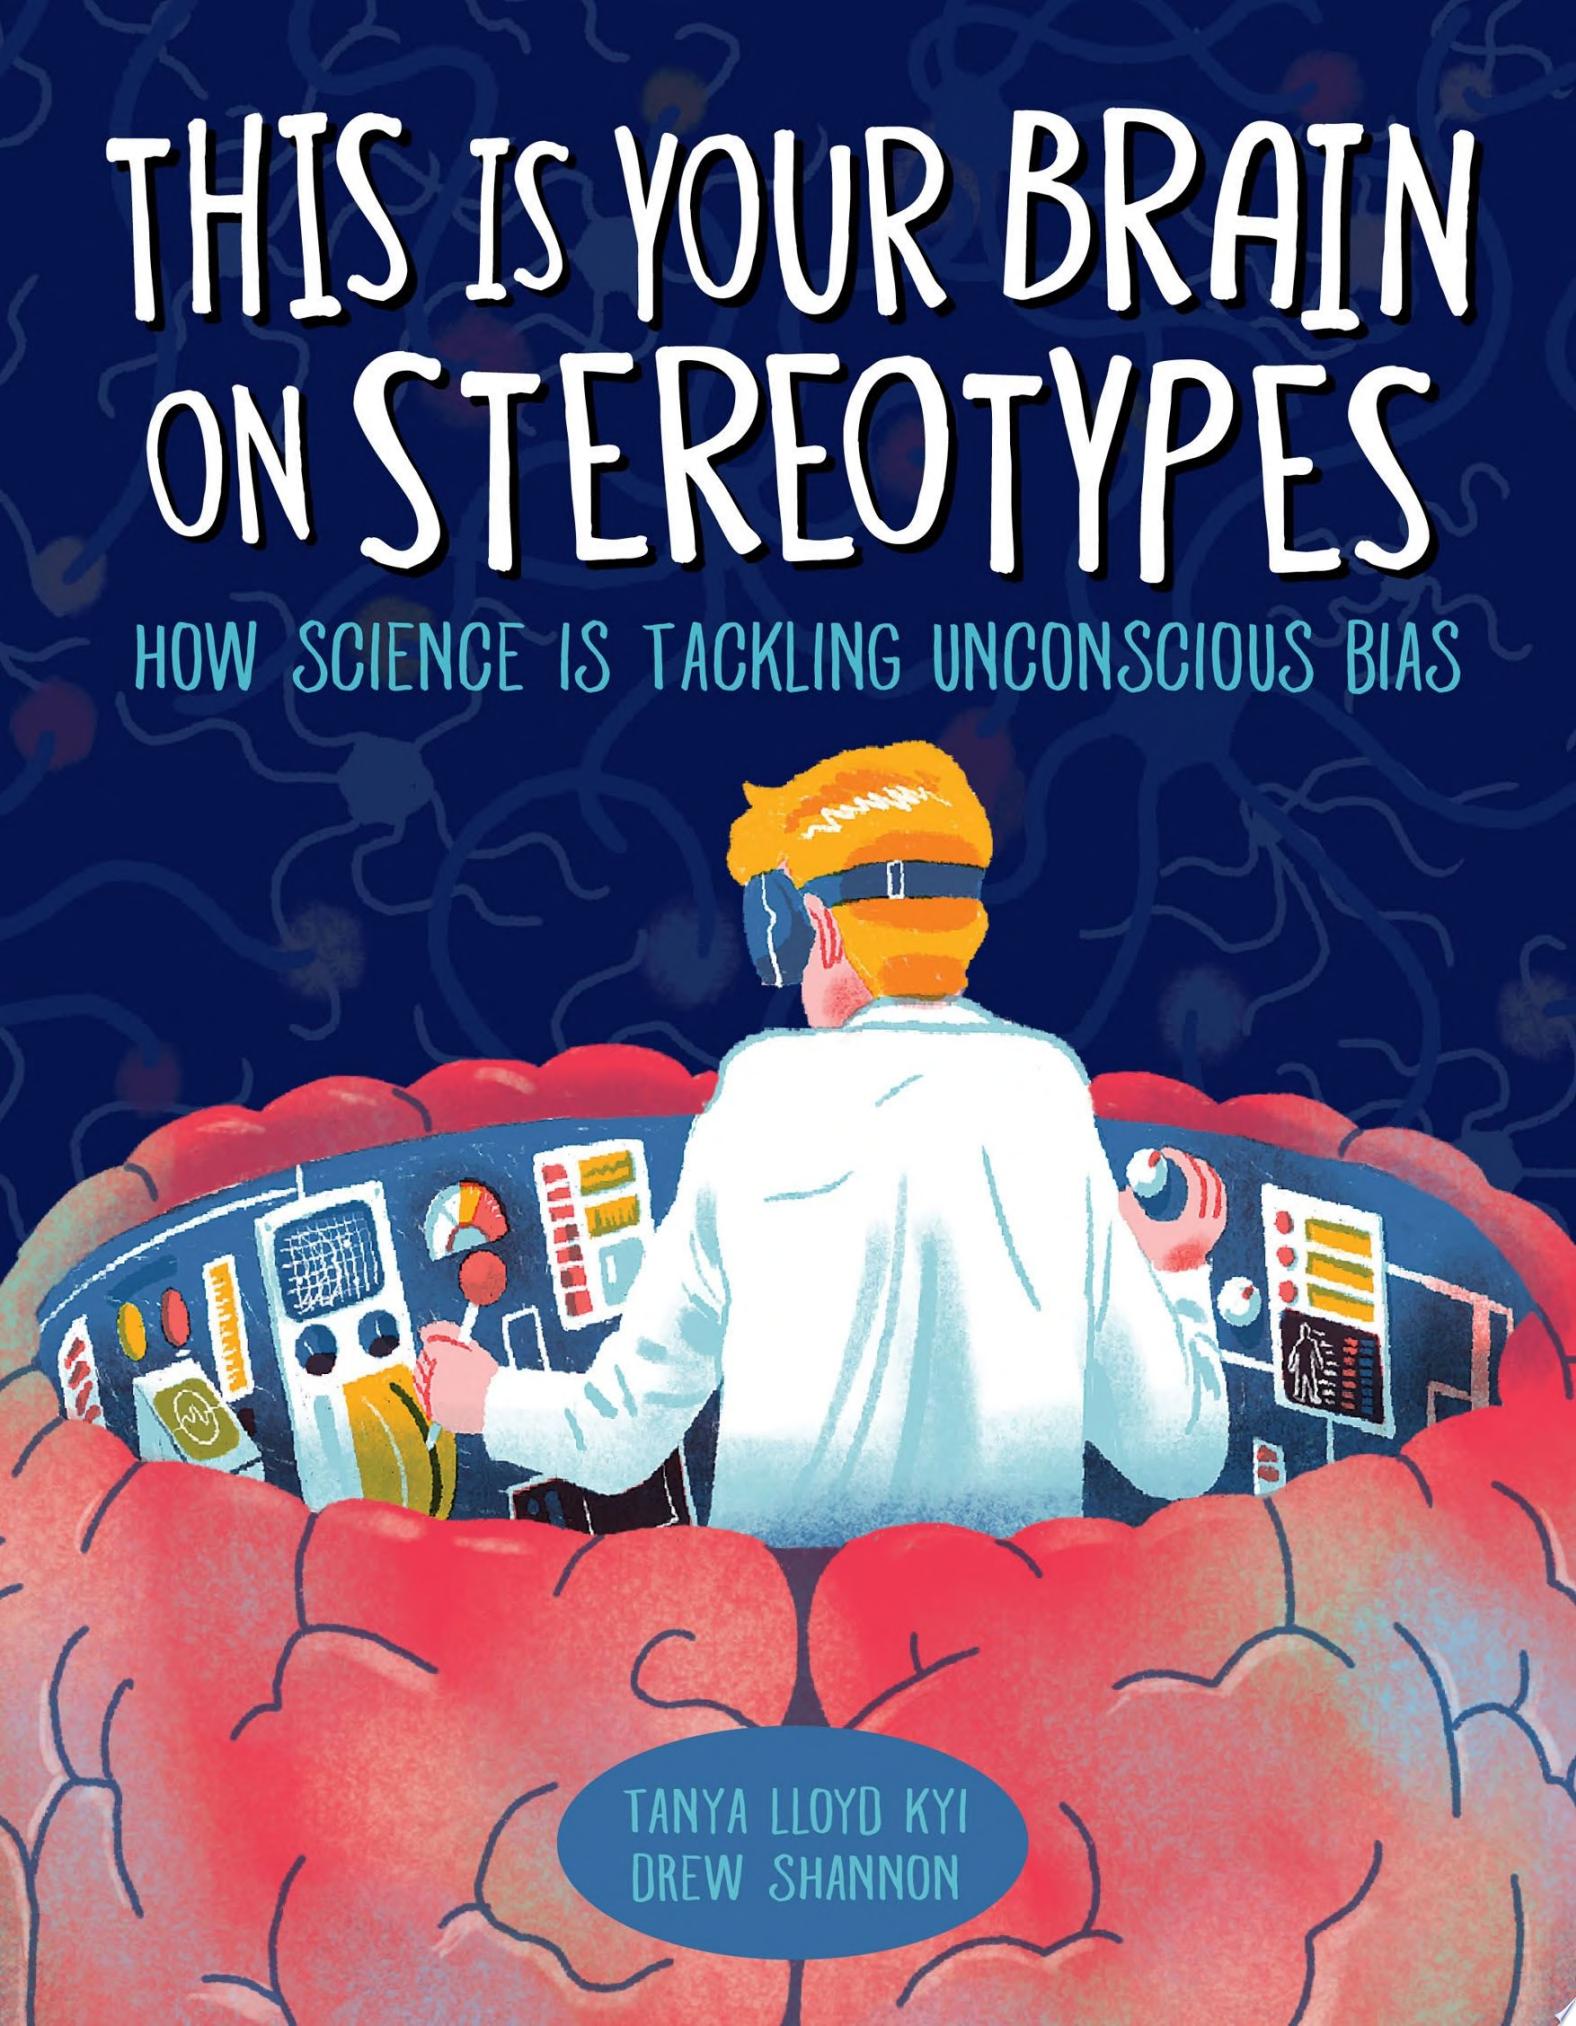 Image for "This Is Your Brain on Stereotypes"